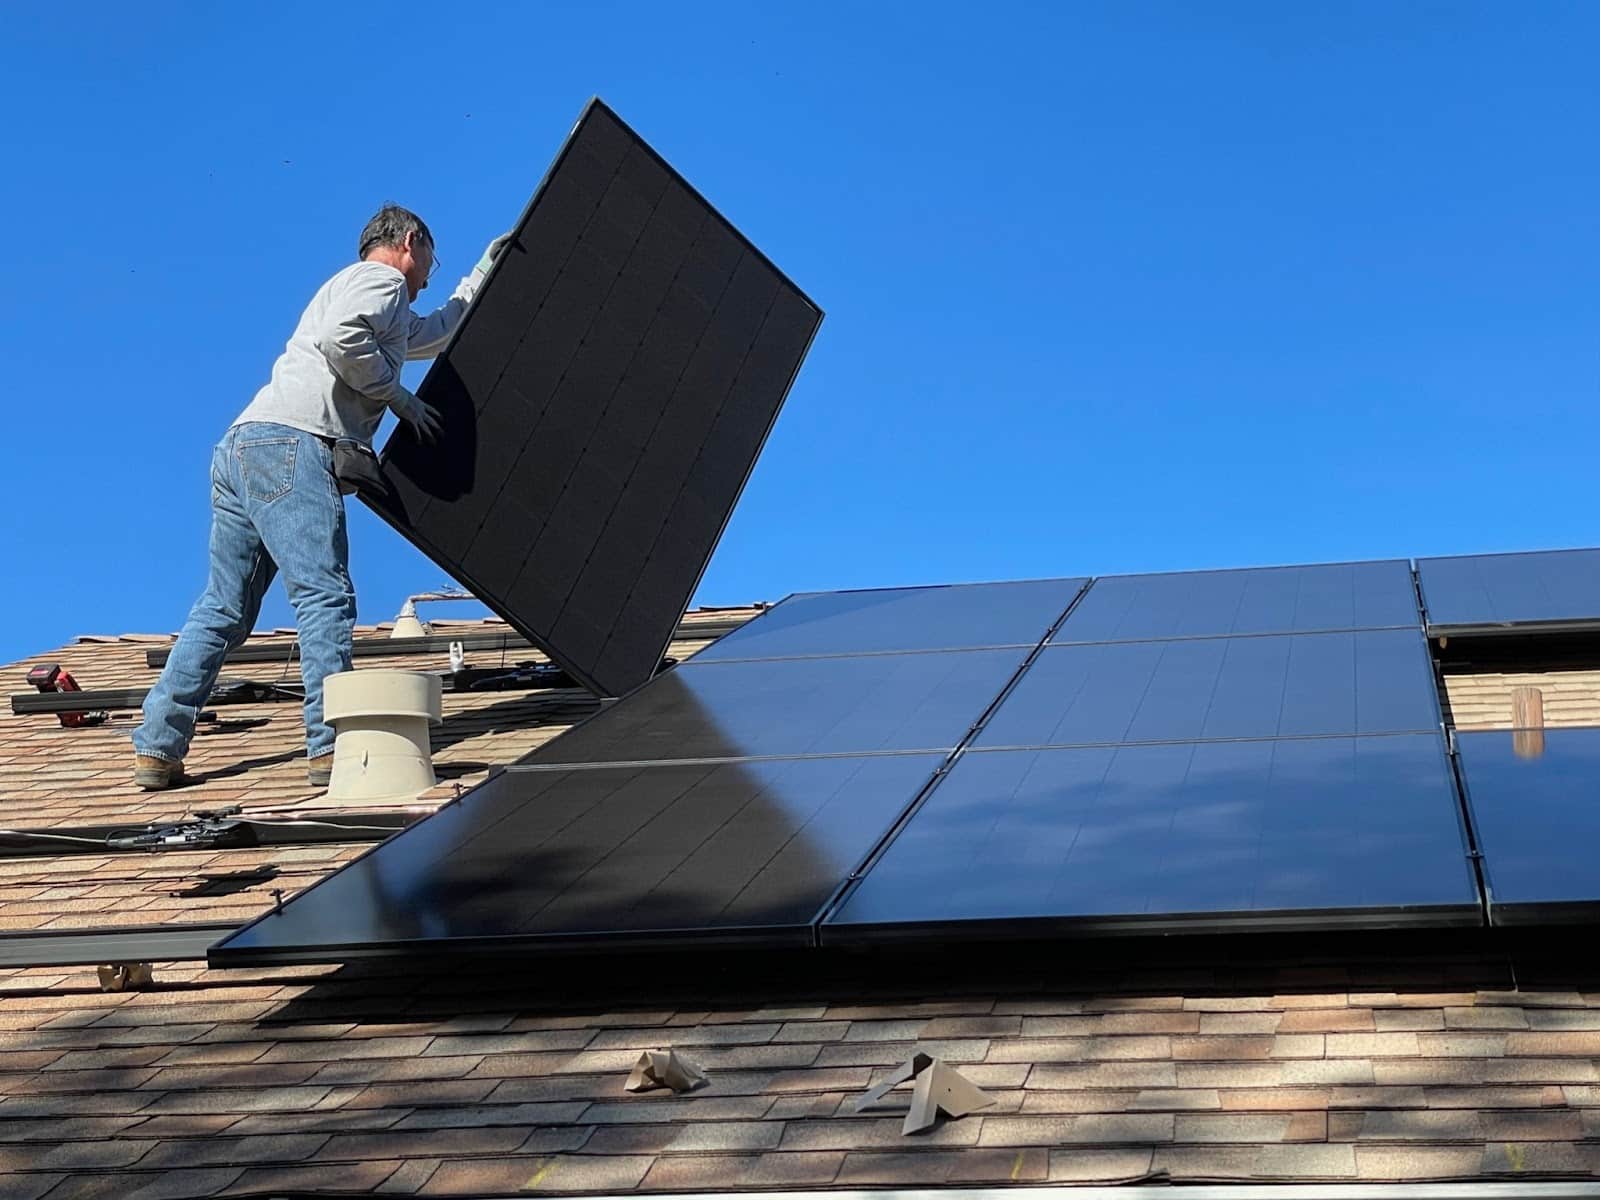 A roofing worker installs solar panels on a roof